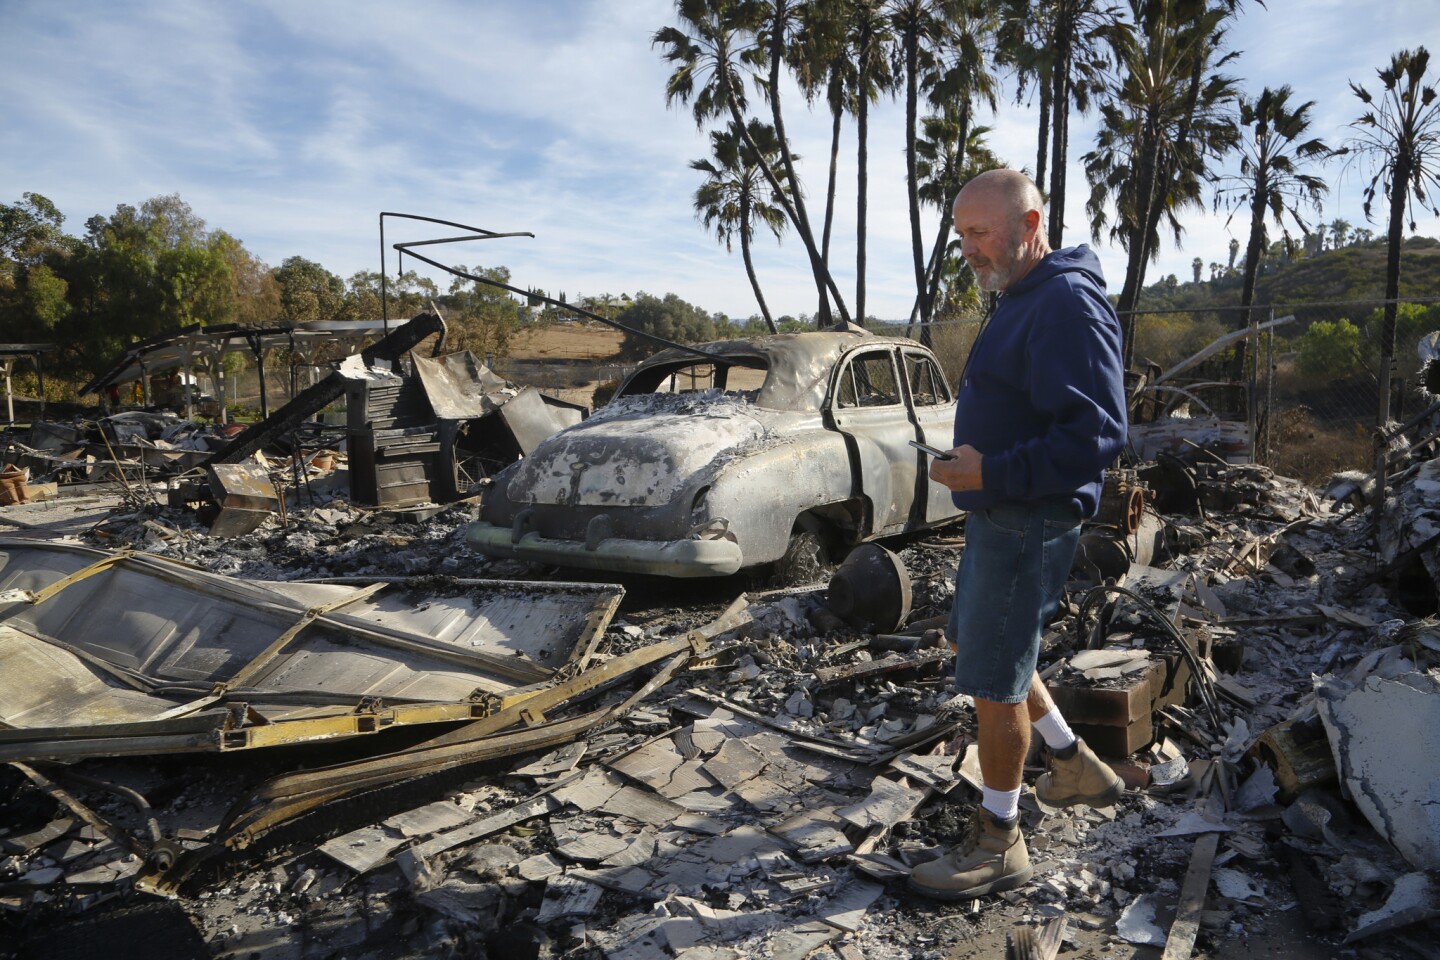 Mike Hulsizer returned to his home in Bonsall for the first time since Thursday's fire. Hulsizer walked around the burned debris of what use to be his garage and where his restored 1949 Oldsmobile was parked.